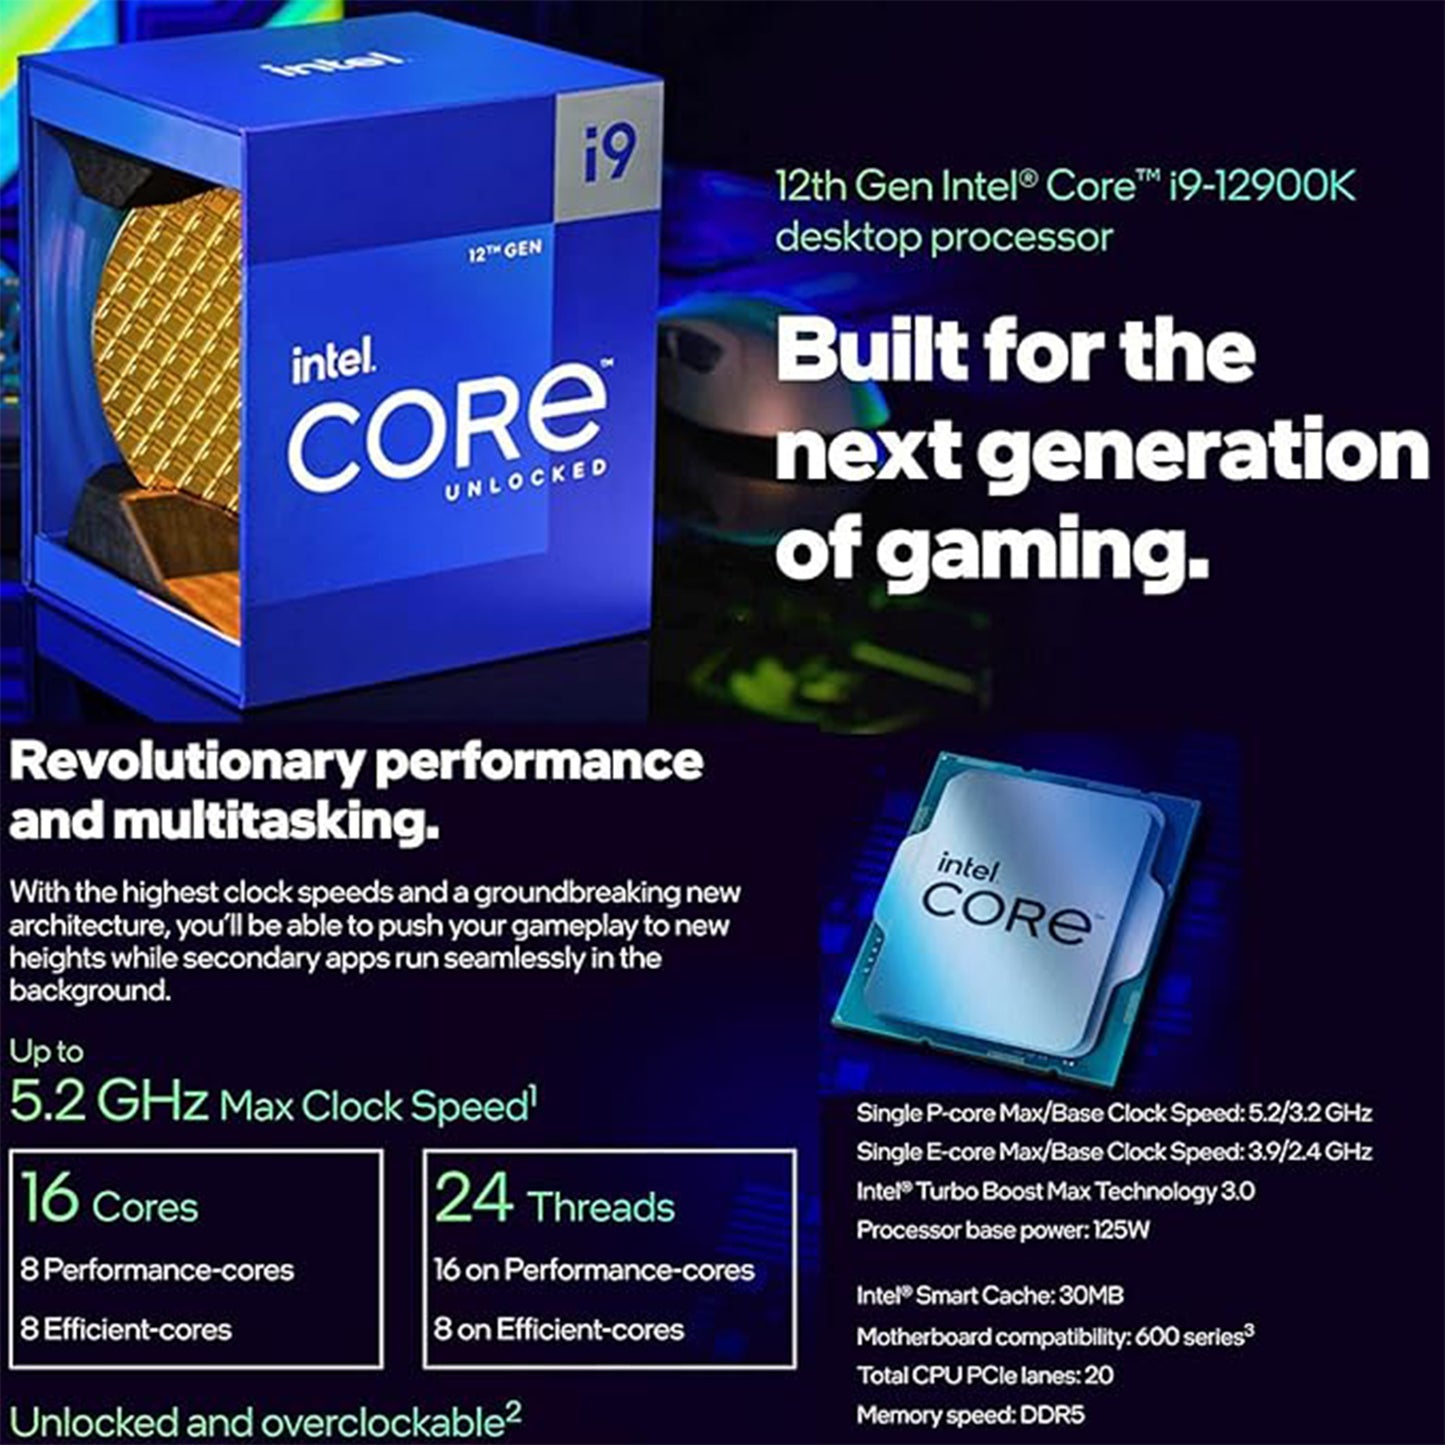 Micro Center Intel Core i9-12900K Desktop Processor 16 (8P+8E) Cores up to 5.2 GHz Unlocked with ASUS TUF Gaming Z790- Plus WiFi DDR5 LGA 1700 ATX Gaming Motherboard